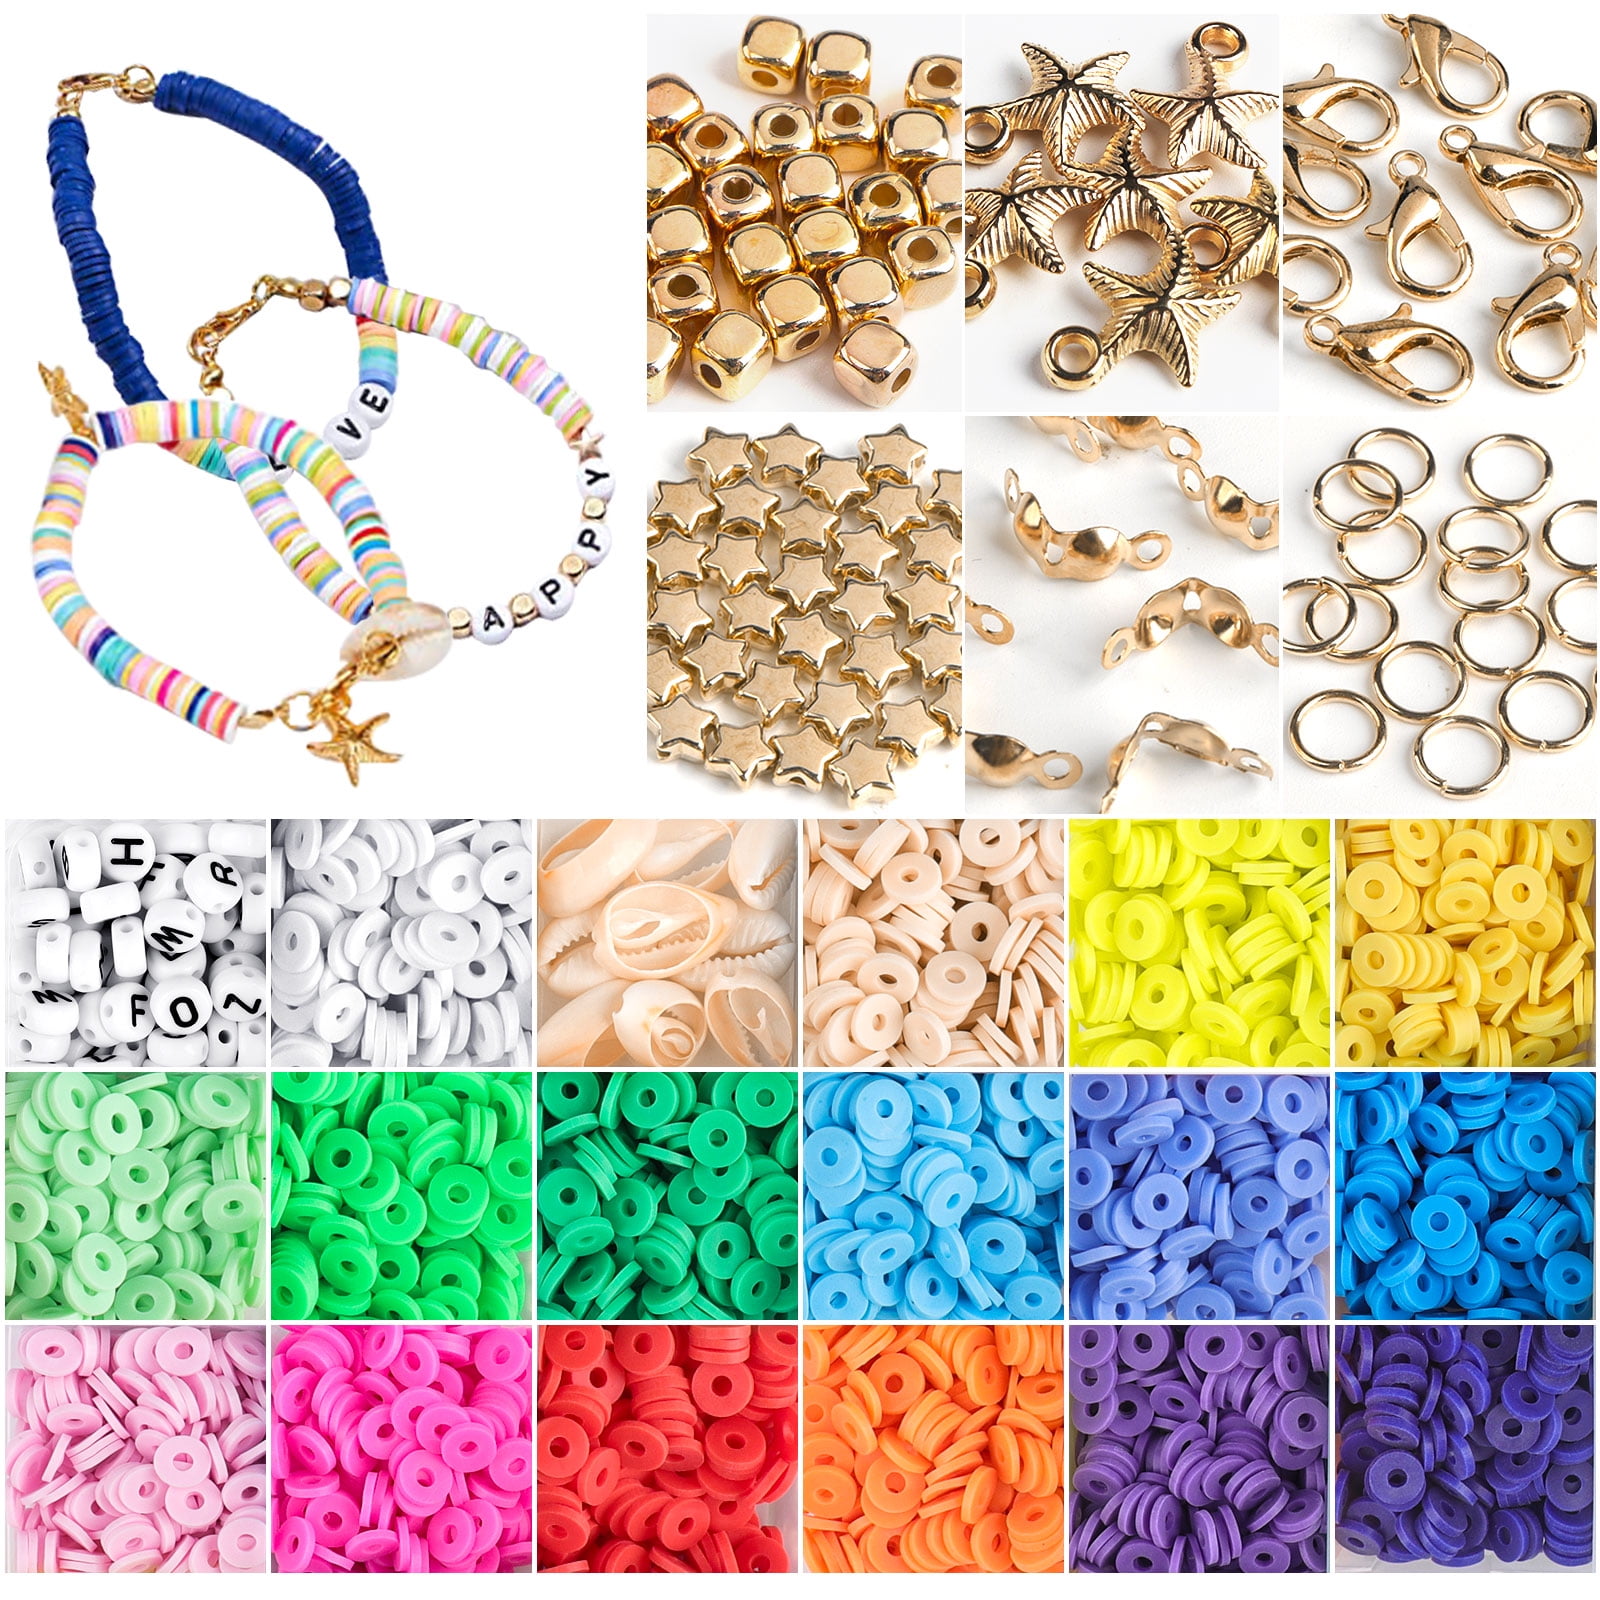 qbodp 10 Strings of 6mm Clay Beads for Jewelry Making, Mixed Colors Flat  Beads for Bracelets Making, Crafts Beaded Decorations Accessories